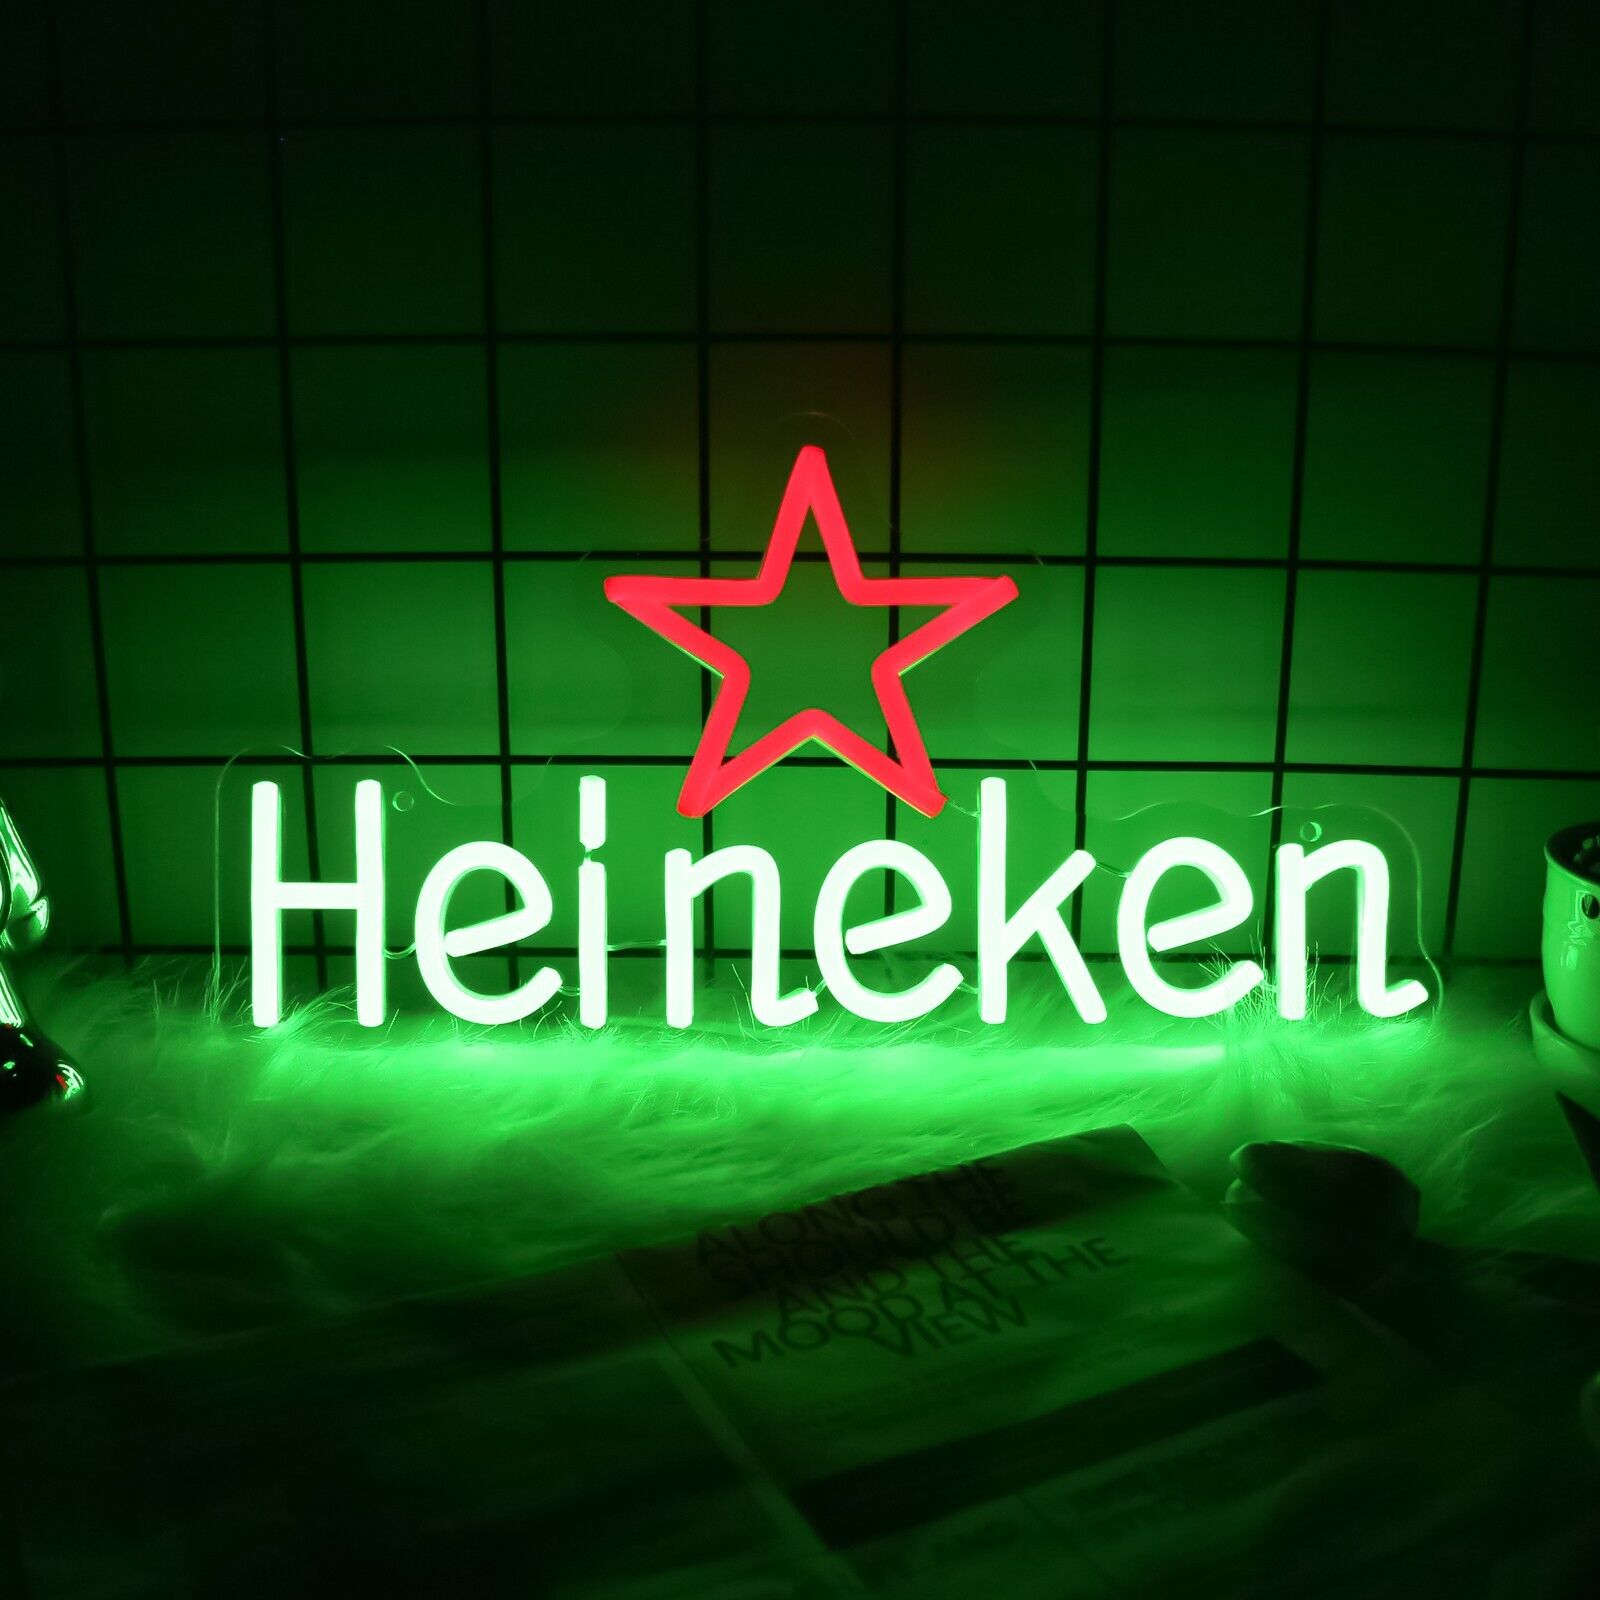 Heineken Neon Sign: Dimmable Bar Decor for Home, Man Cave, Club, Party